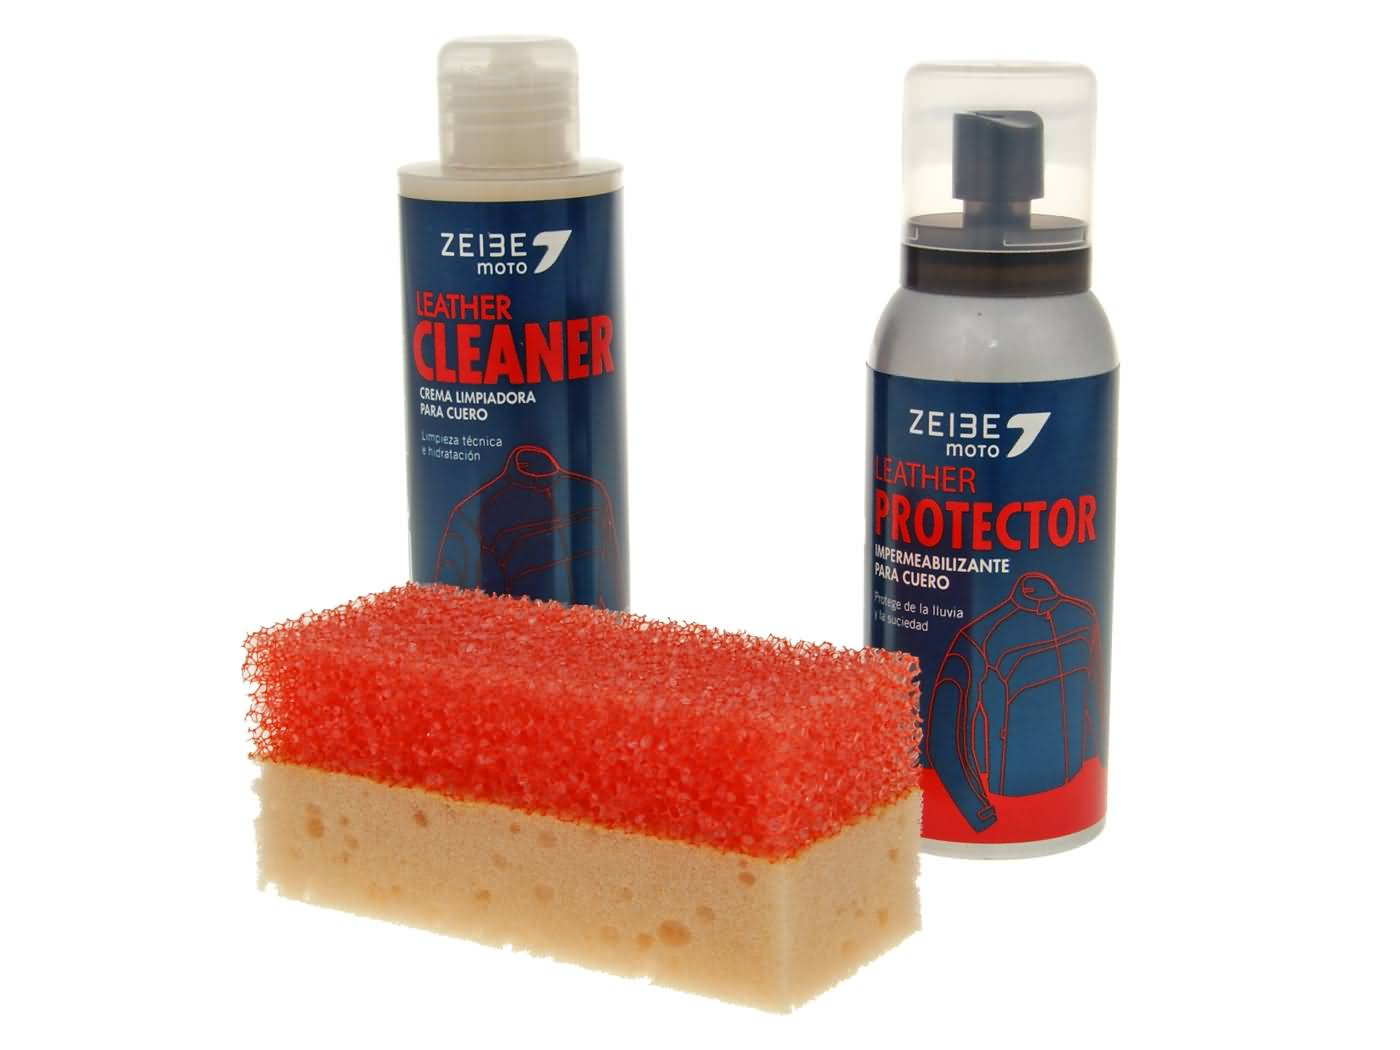 Leather Pack Zeibe Cleaner 1x150ml And Protector 1x100ml